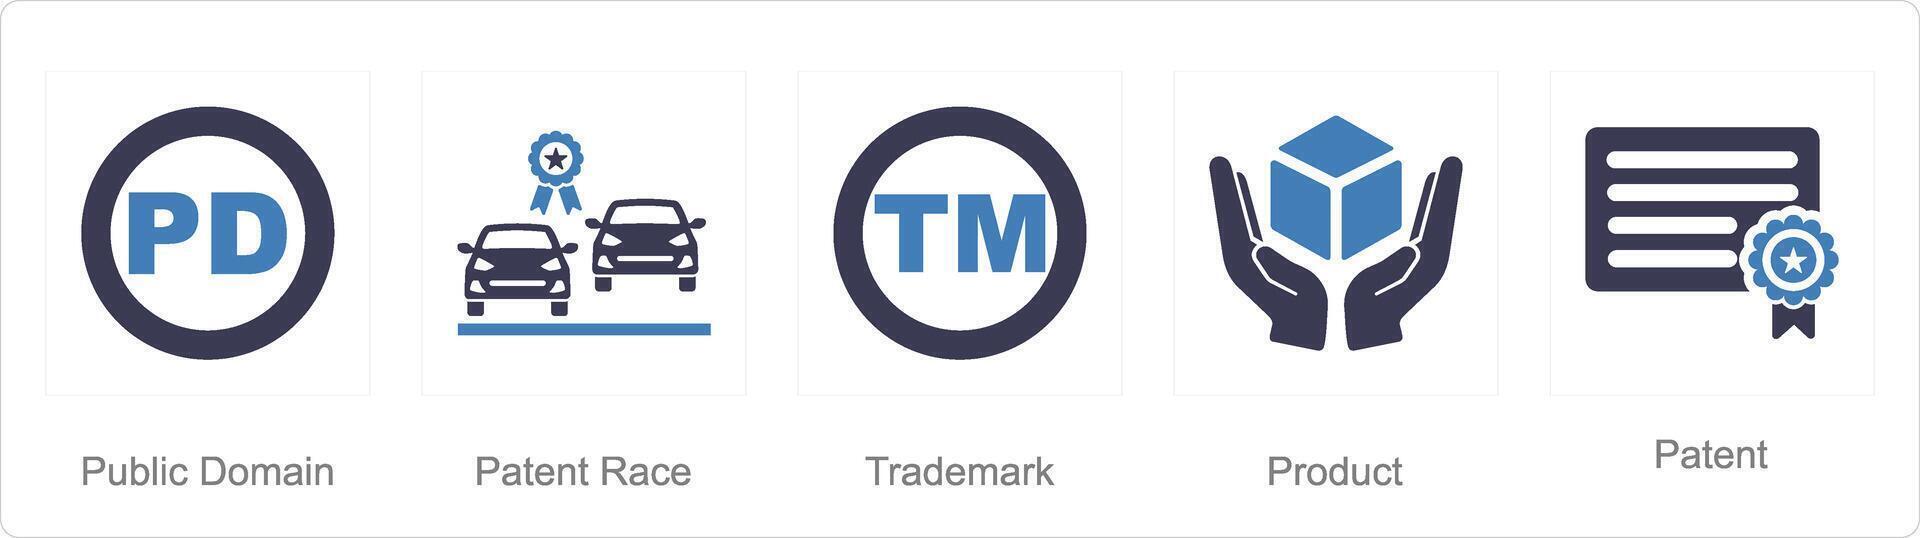 A set of 5 Intellectual Property icons as public domain, patent race, trademark vector